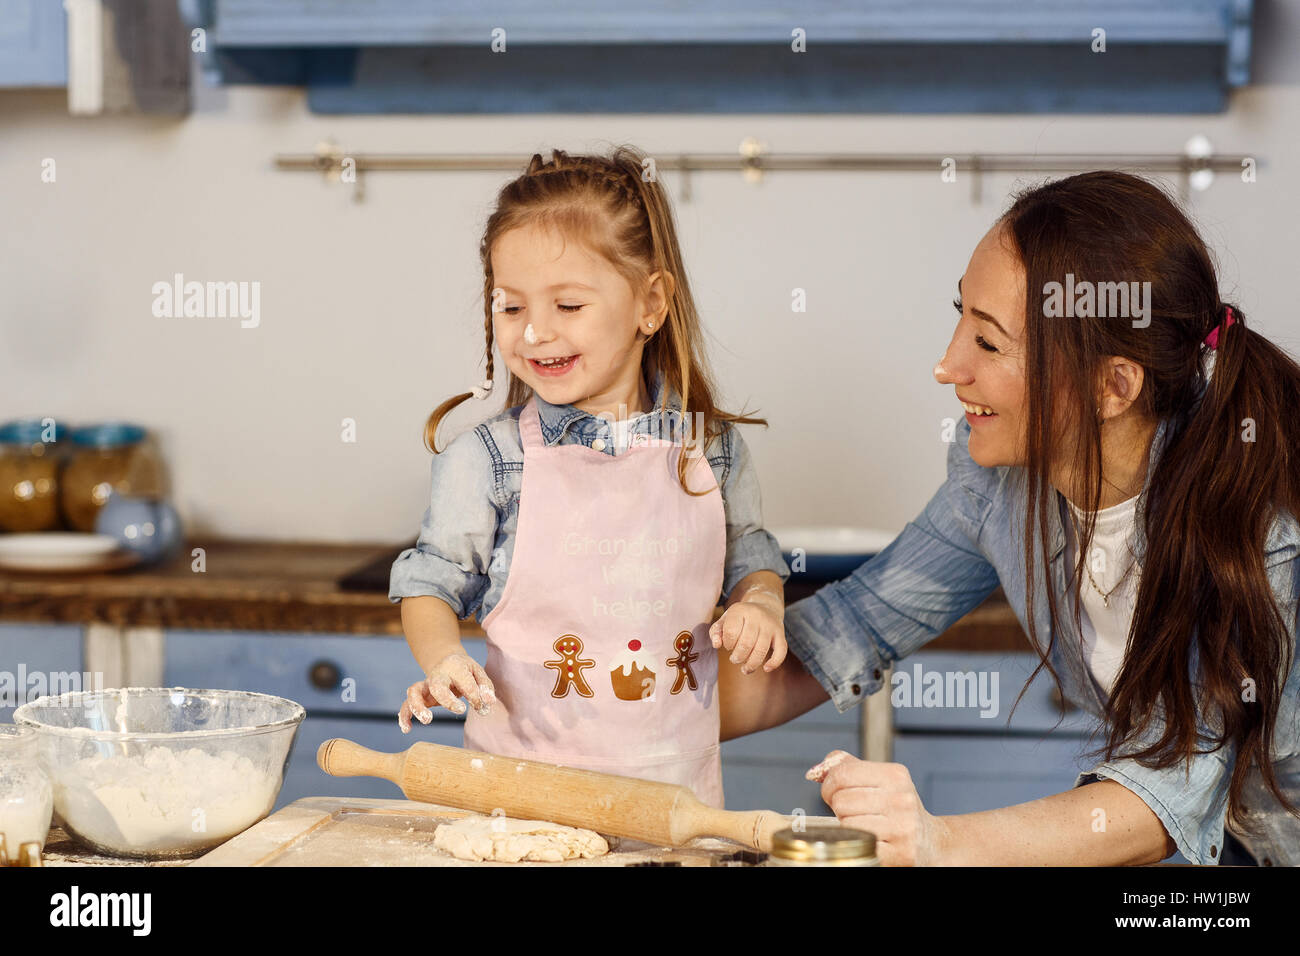 Cooking acticity concept Stock Photo